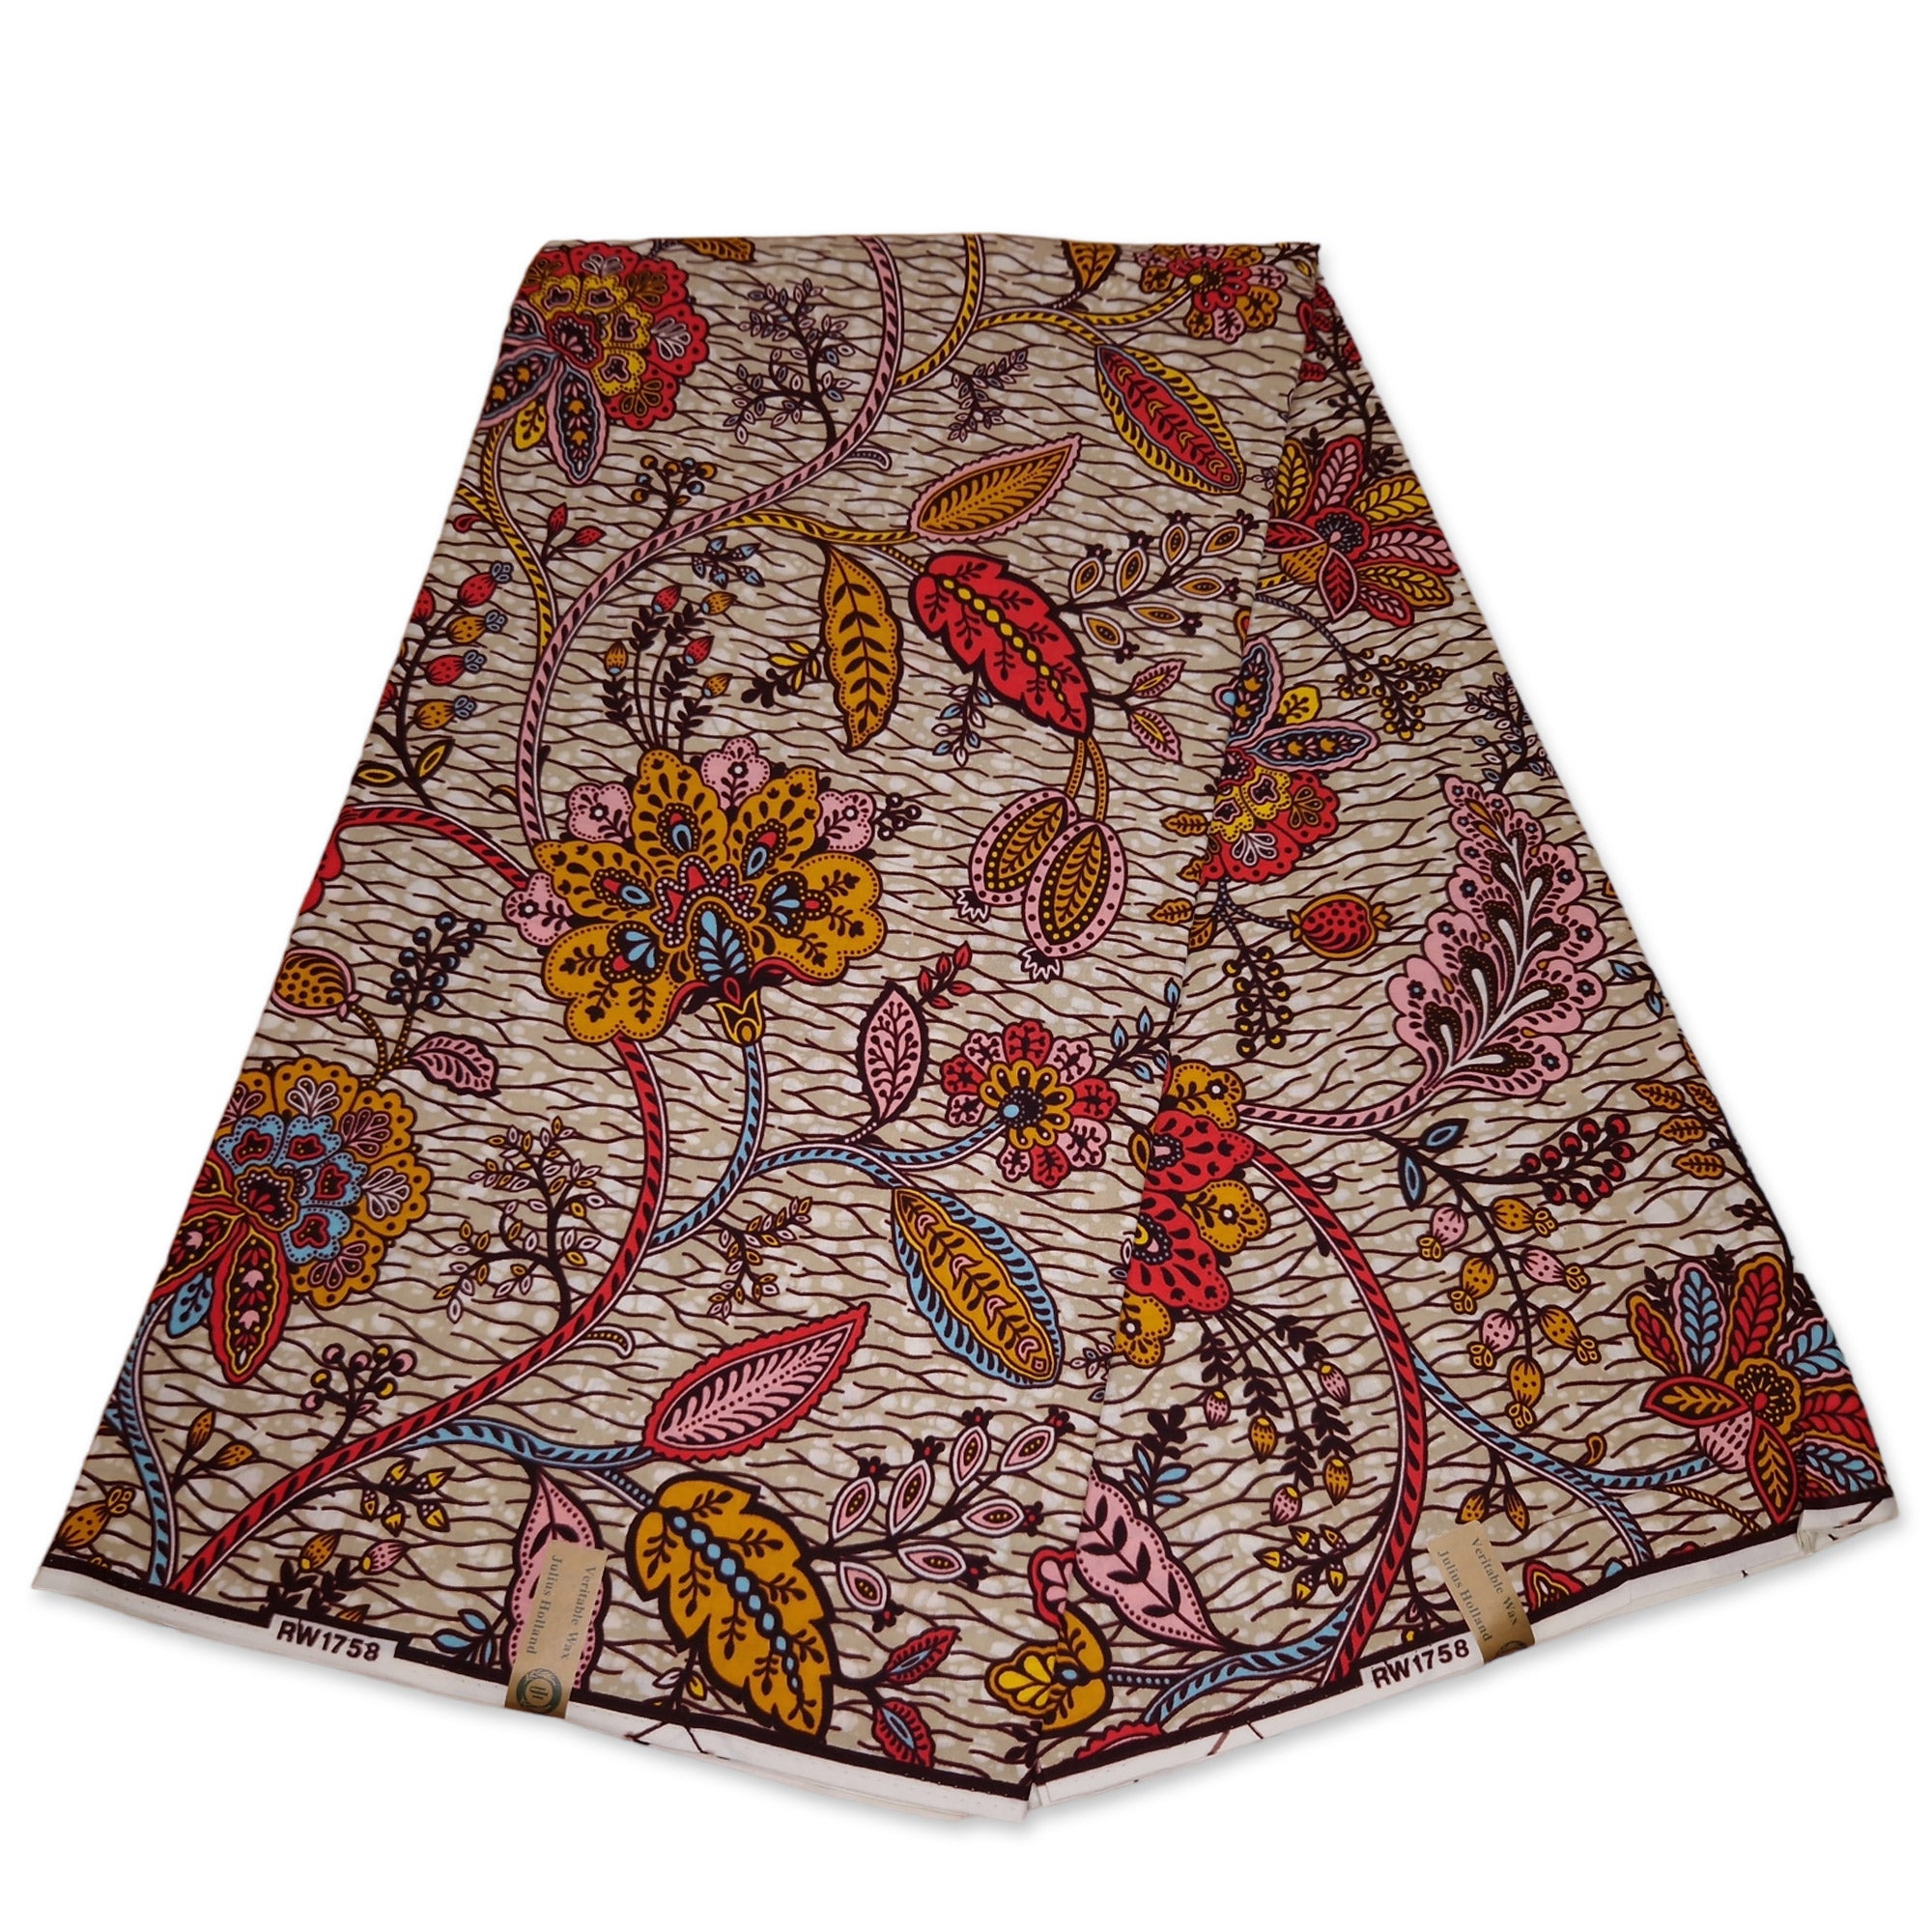 African Wax print fabric - Multicolor floral life